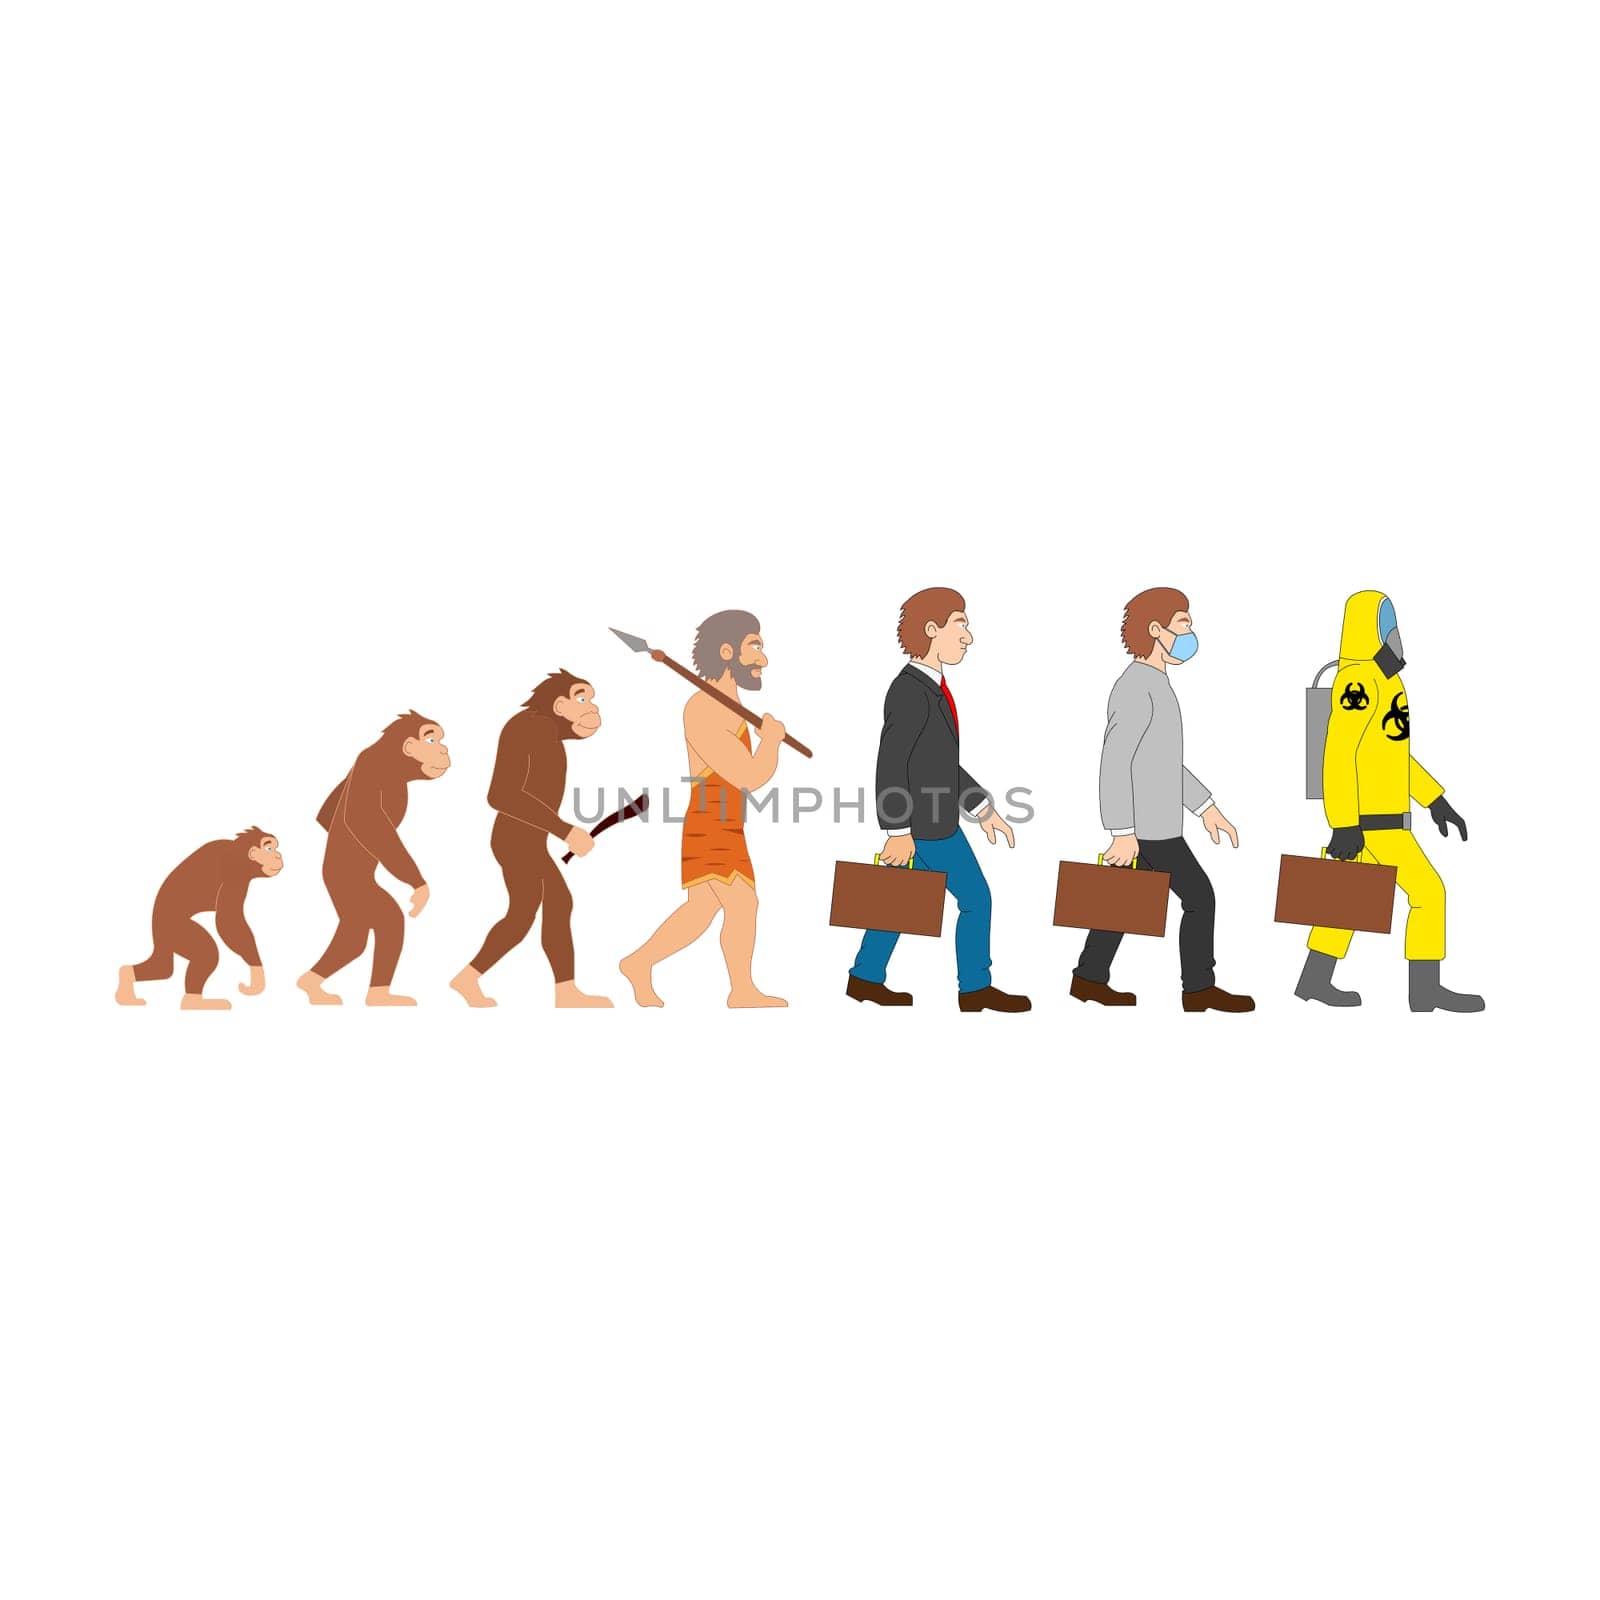 The human evolution from times of monkey to future of hazard suits.